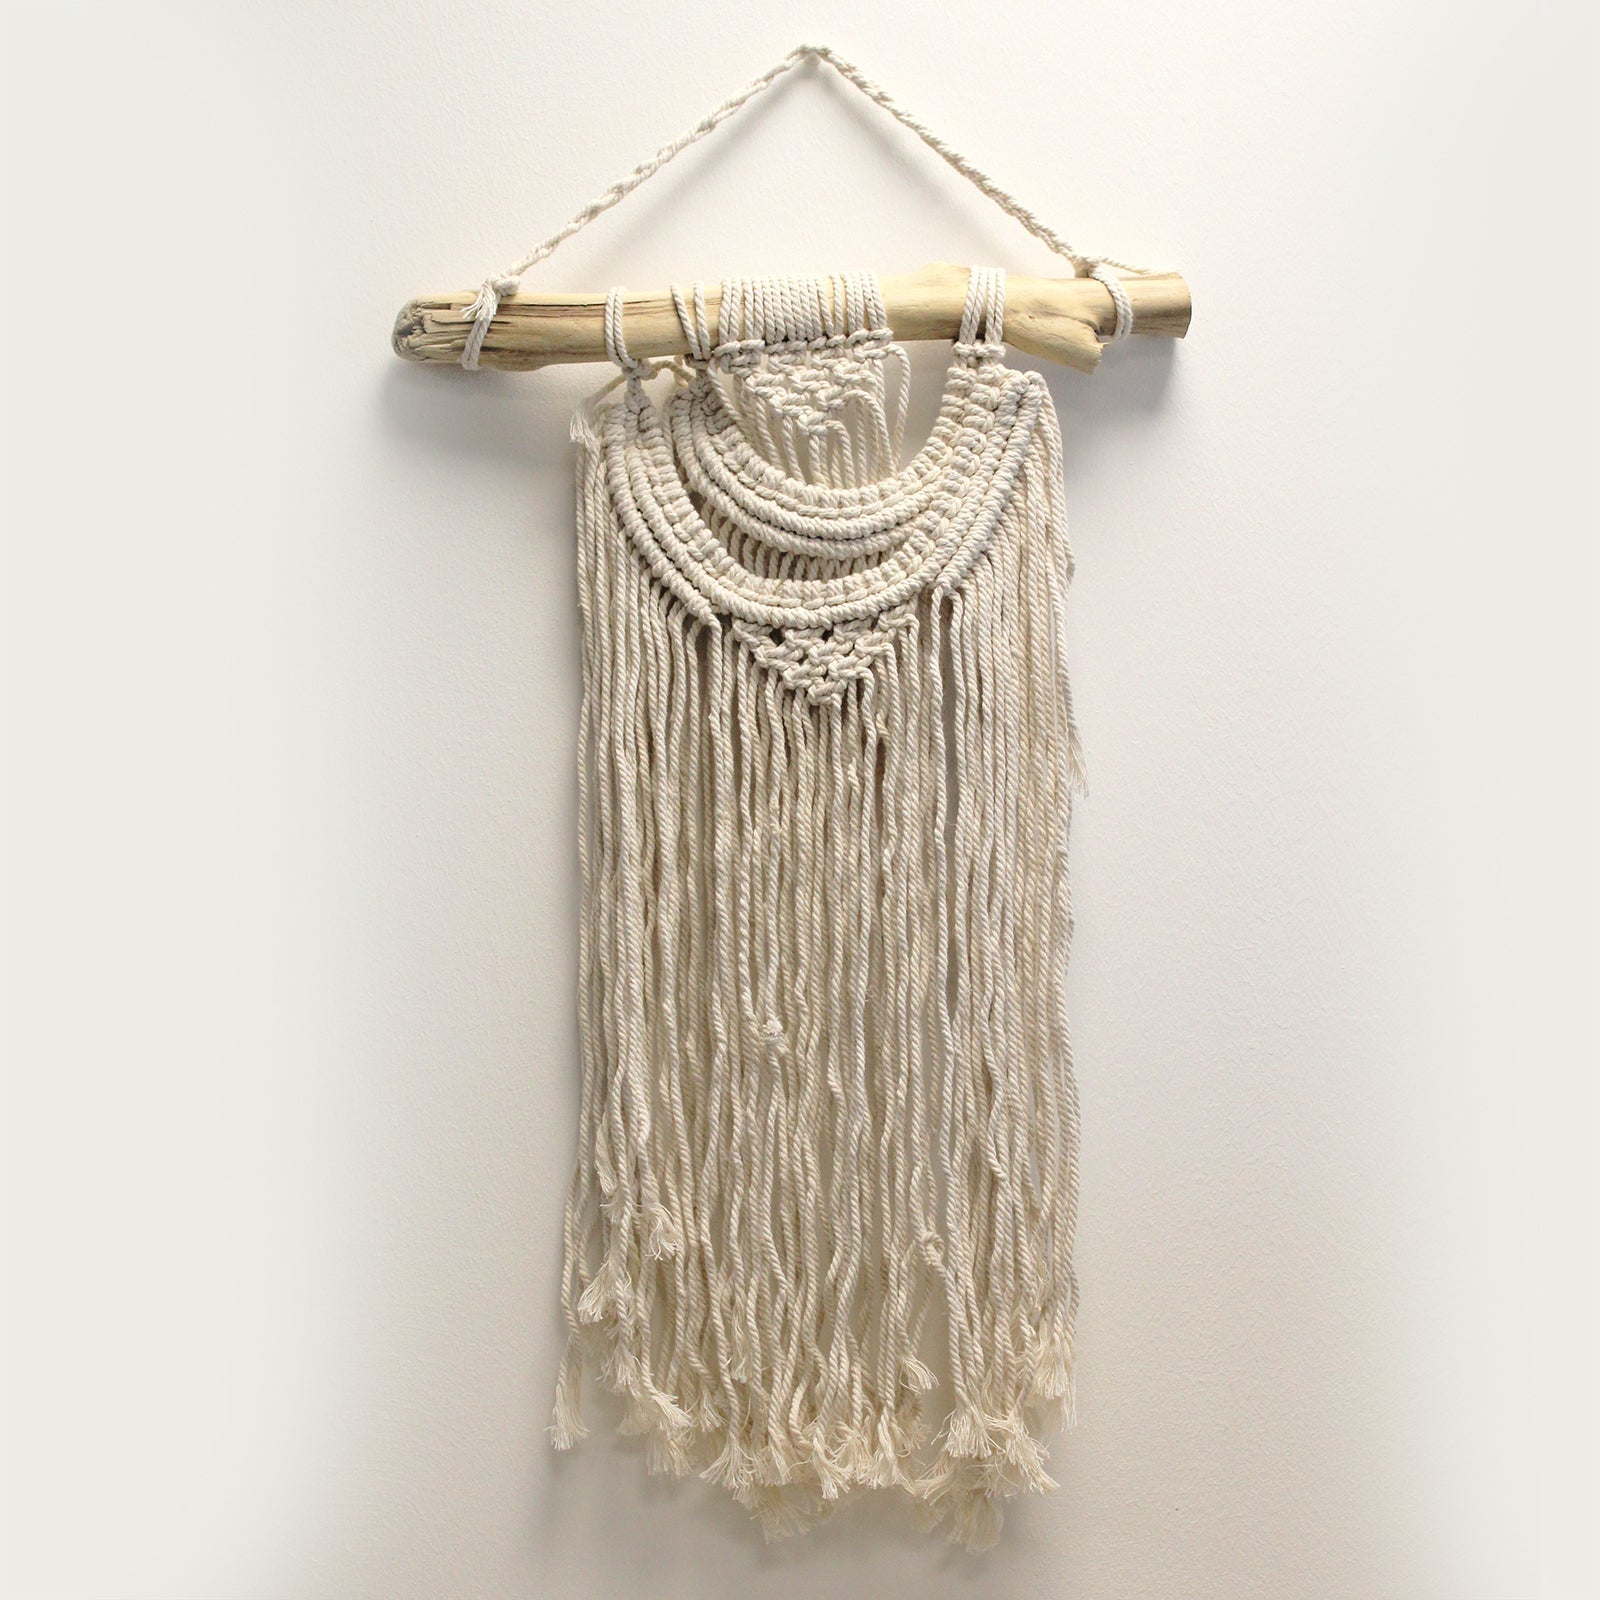 View Macrame Wall Hanging Two Waves information